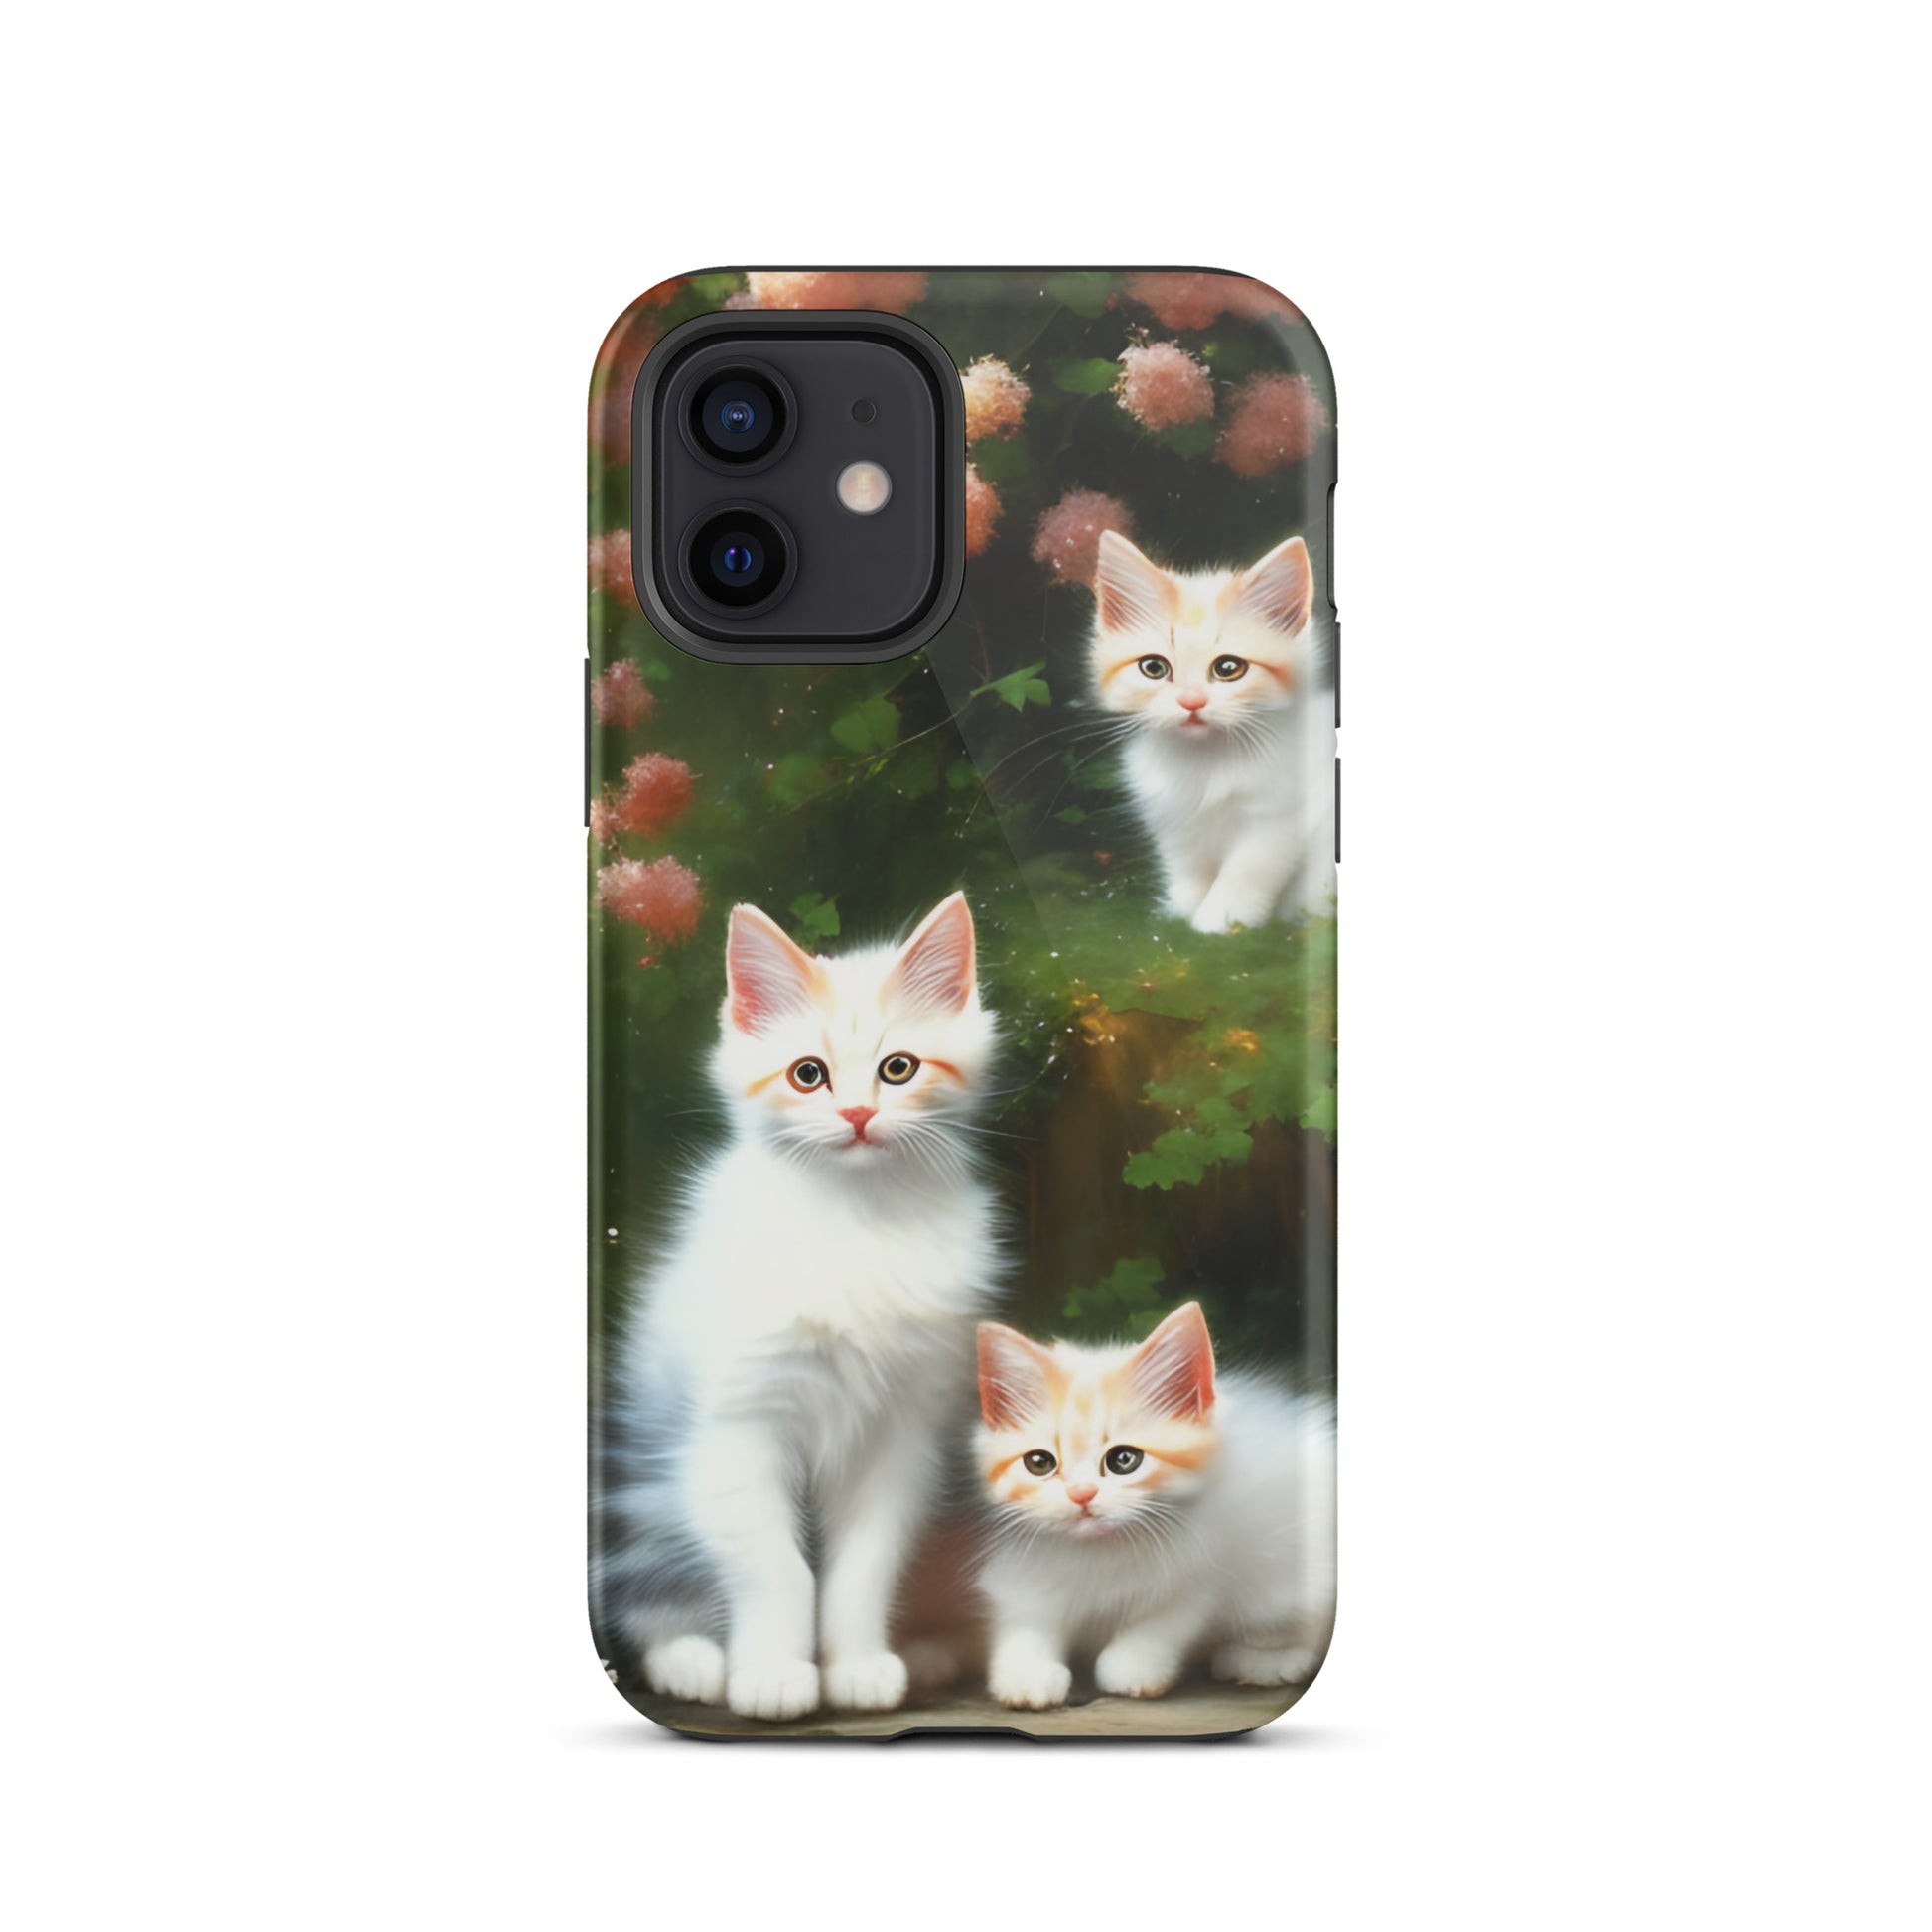 A picture of a iphone tough case with 3 fluffy white and orange kittens and peach colored flowers in the background - glossy-iphone-12-front